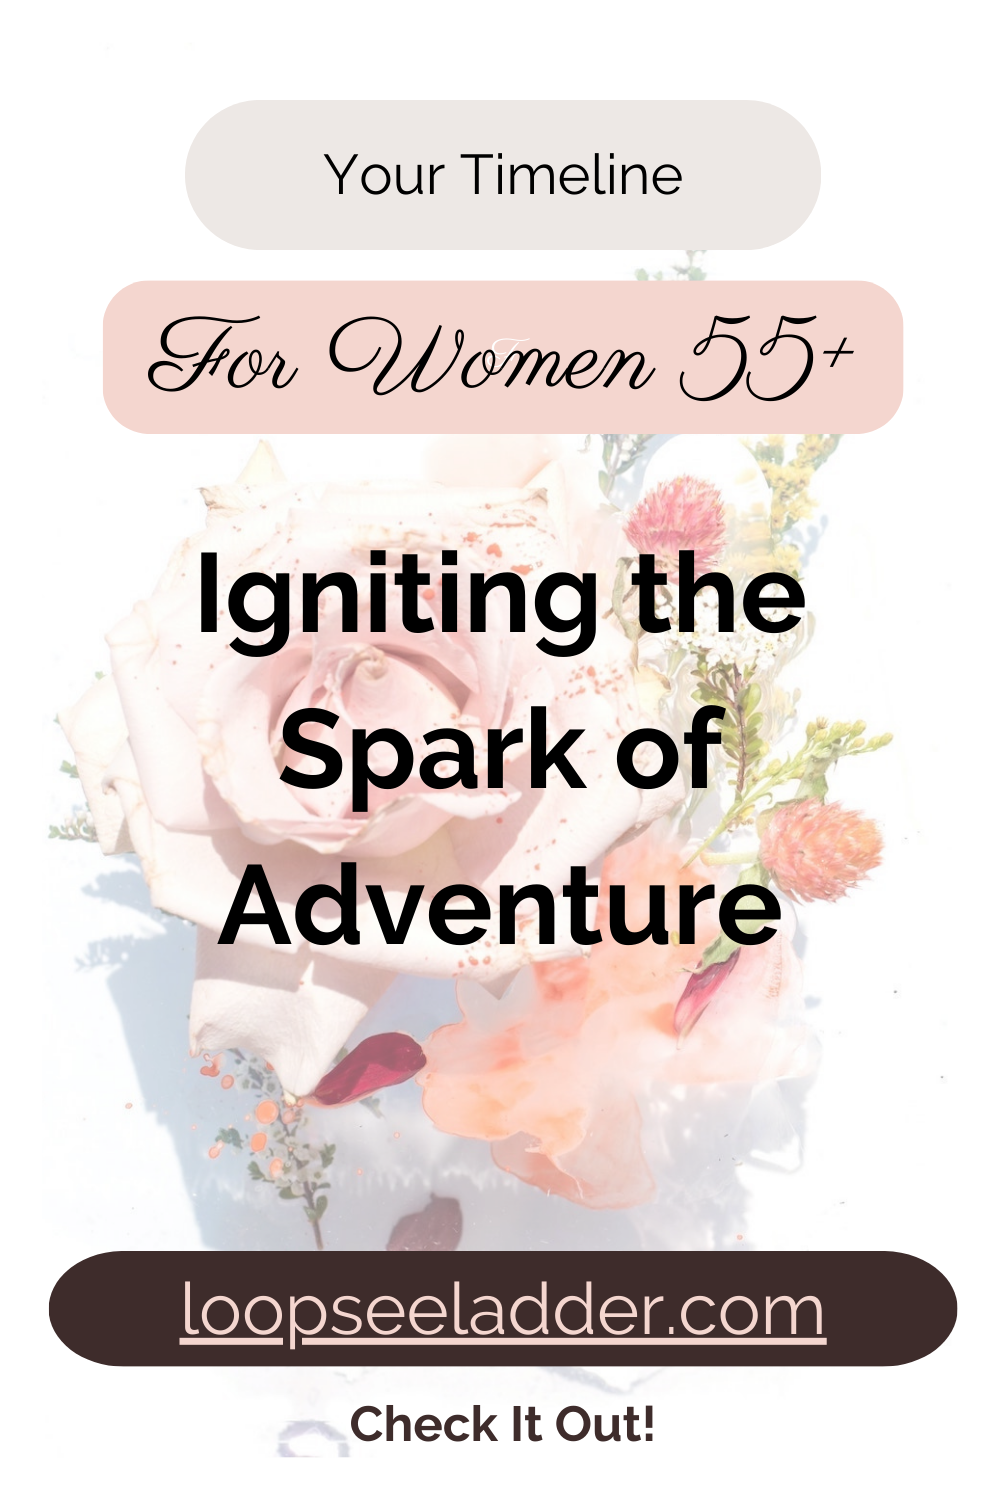 Unconventional Wisdom: Igniting the Spark of Adventure in Women 55+